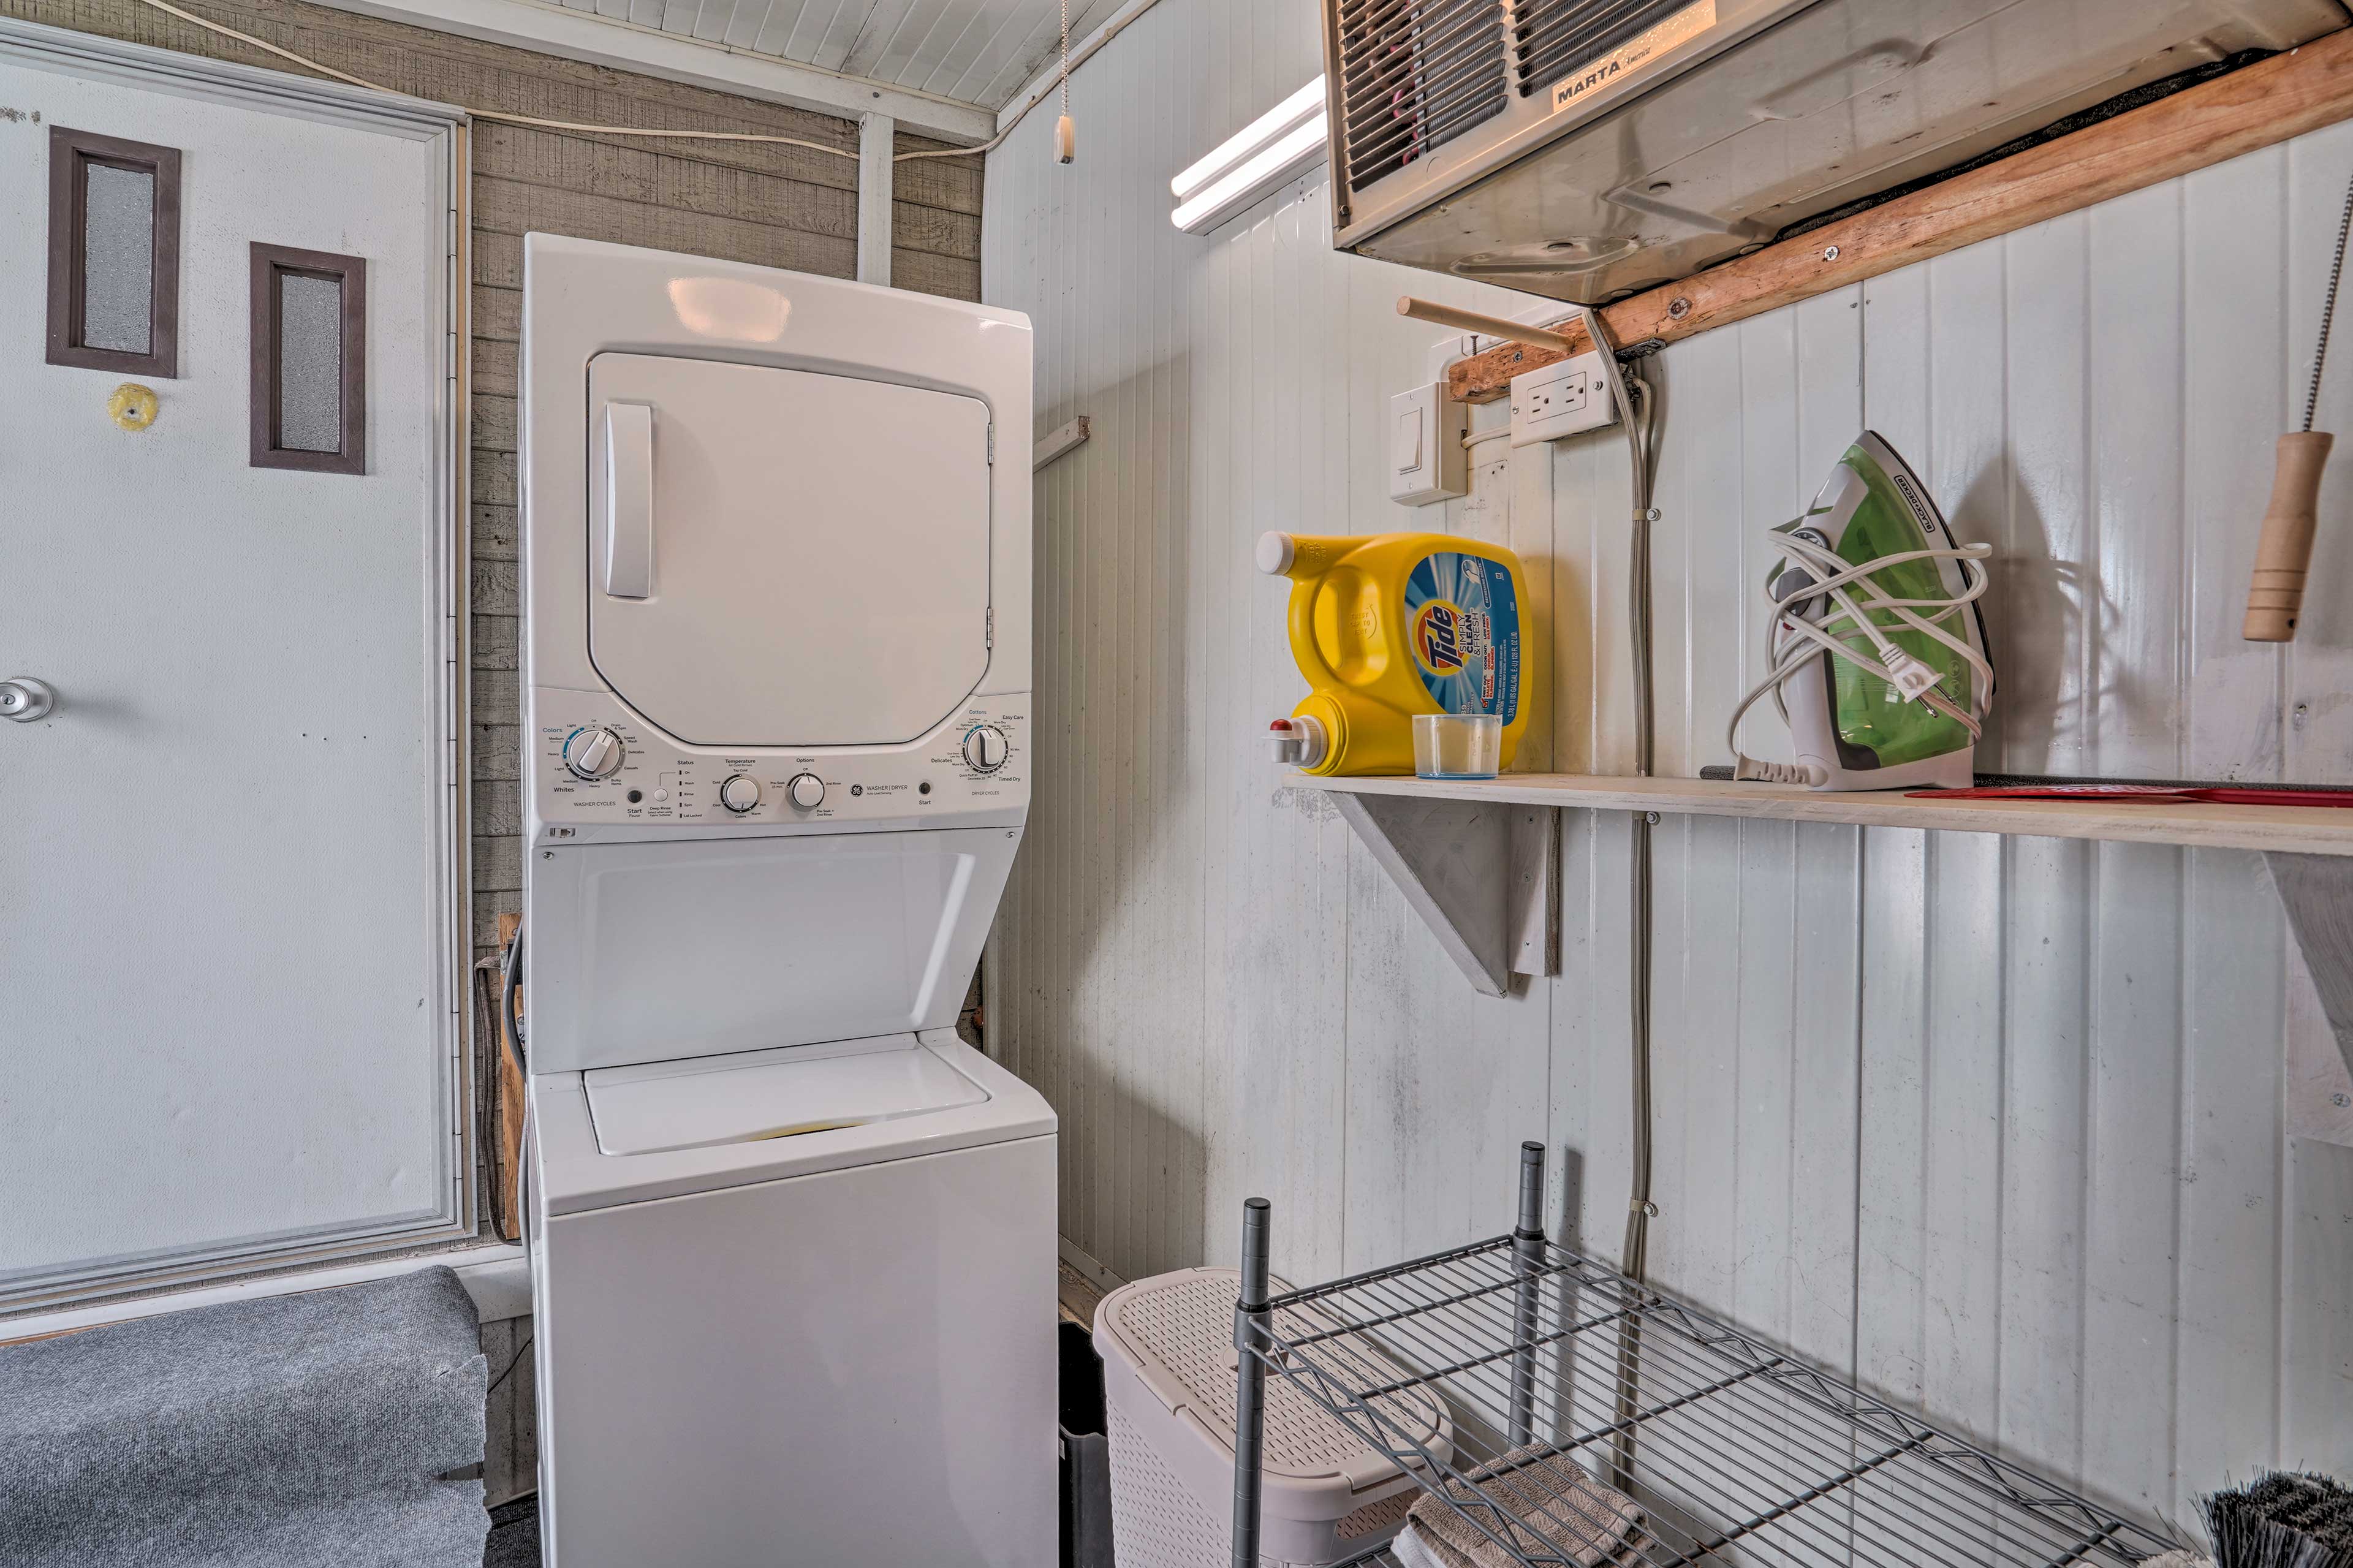 Laundry Room | Laundry Detergent | Iron & Board